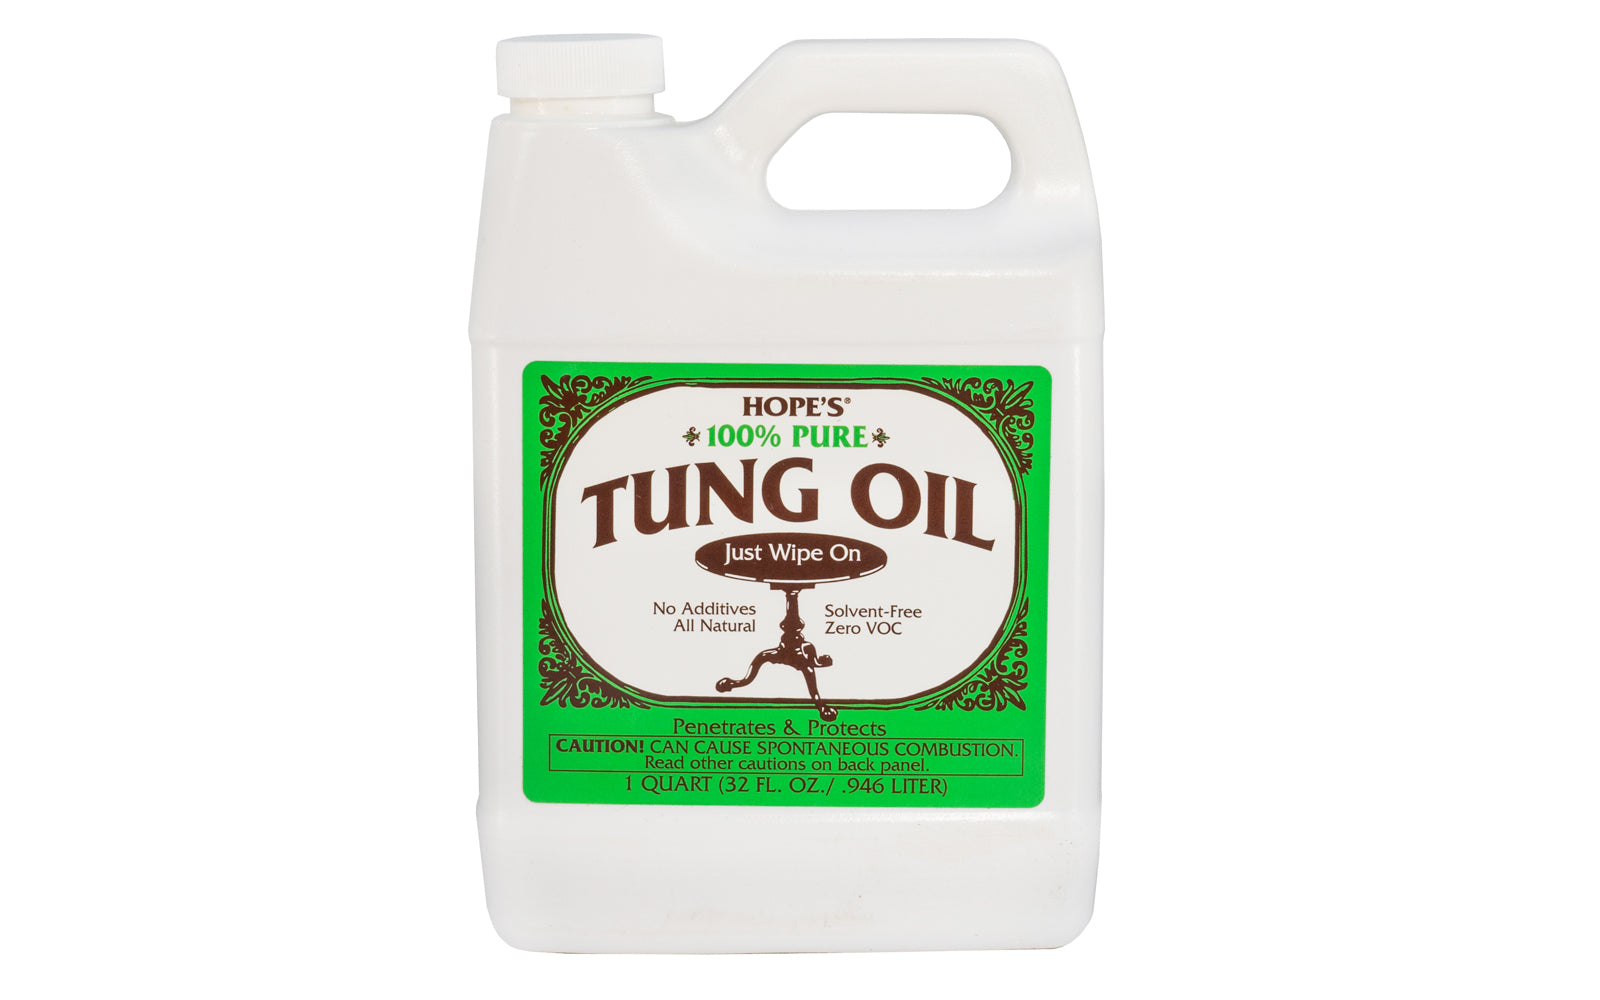 Hope's 100% Pure Tung Oil ~ 32 fl oz - 1 Quart - Zero VOC ~ Protects & beautifies all types of woods ~ No additives - All natural ~ Produces a classic 'hand rubbed' finish on fine wood surfaces